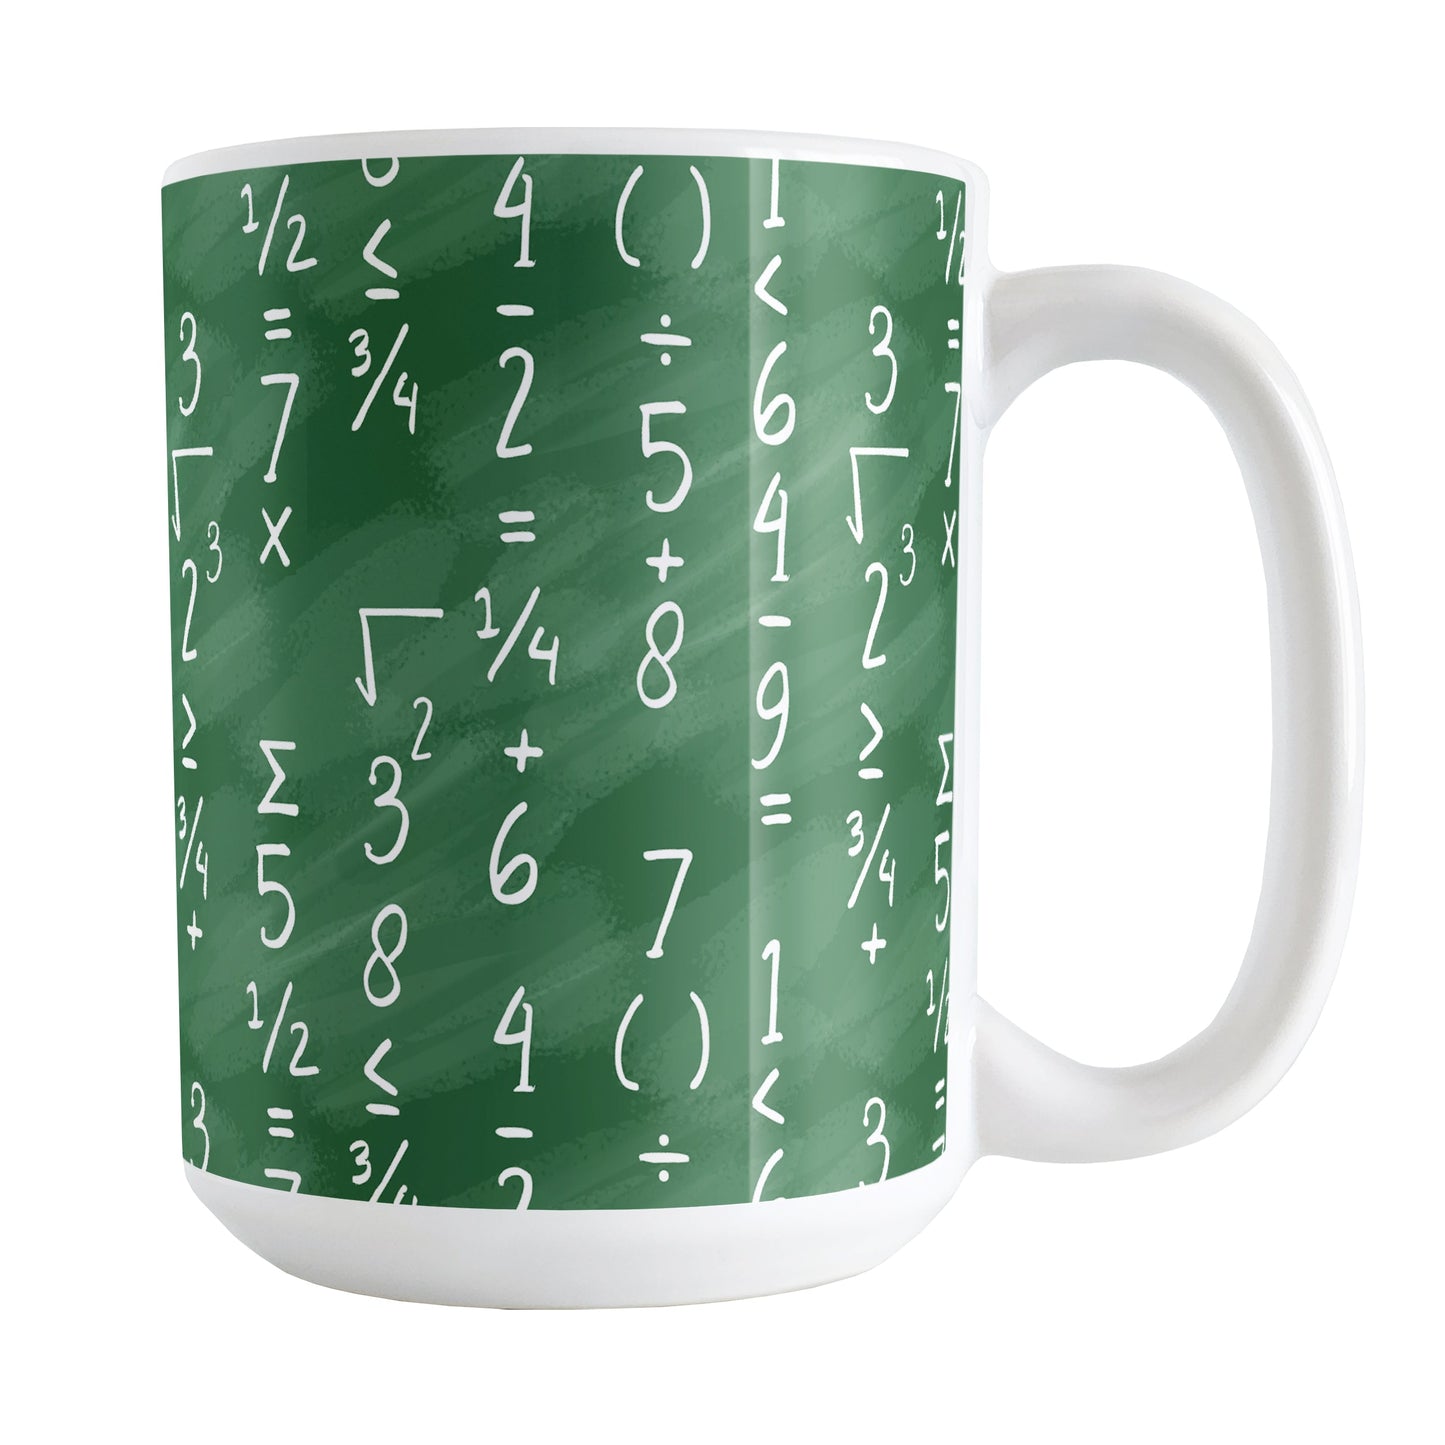 Mathematics Pattern Math Mug (15oz) at Amy's Coffee Mugs. A ceramic coffee mug designed with handwritten numbers and simple math symbols and functions in vertical columns over a green chalkboard background that wraps around the mug to the handle. This mug is perfect for mathematicians and math teachers, and for people who appreciate mathematics.